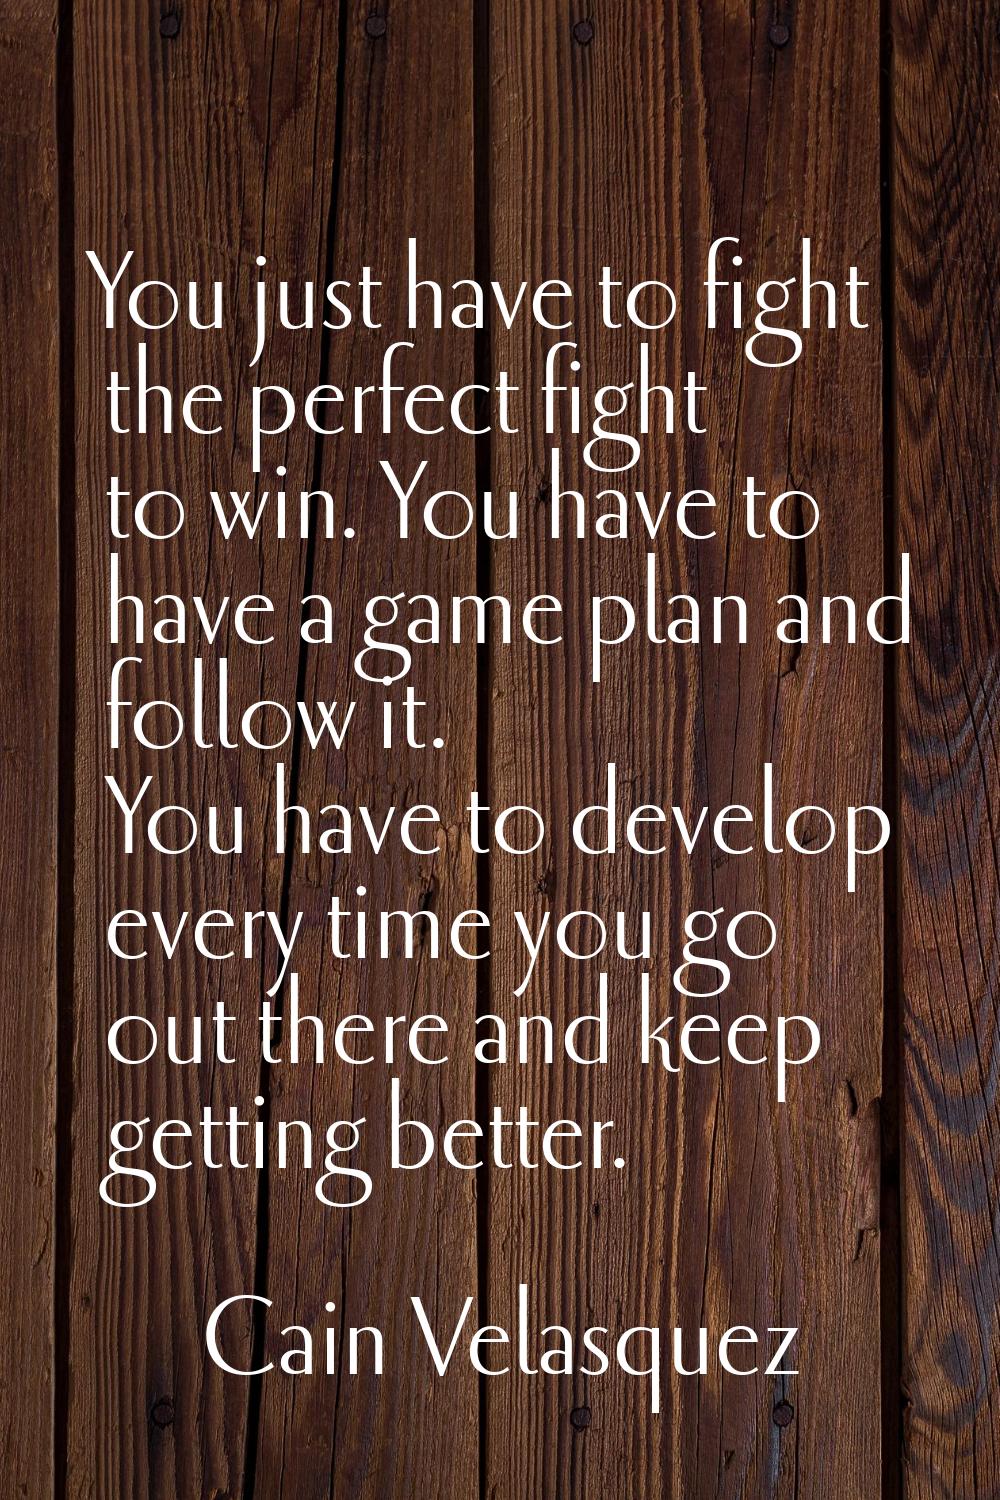 You just have to fight the perfect fight to win. You have to have a game plan and follow it. You ha